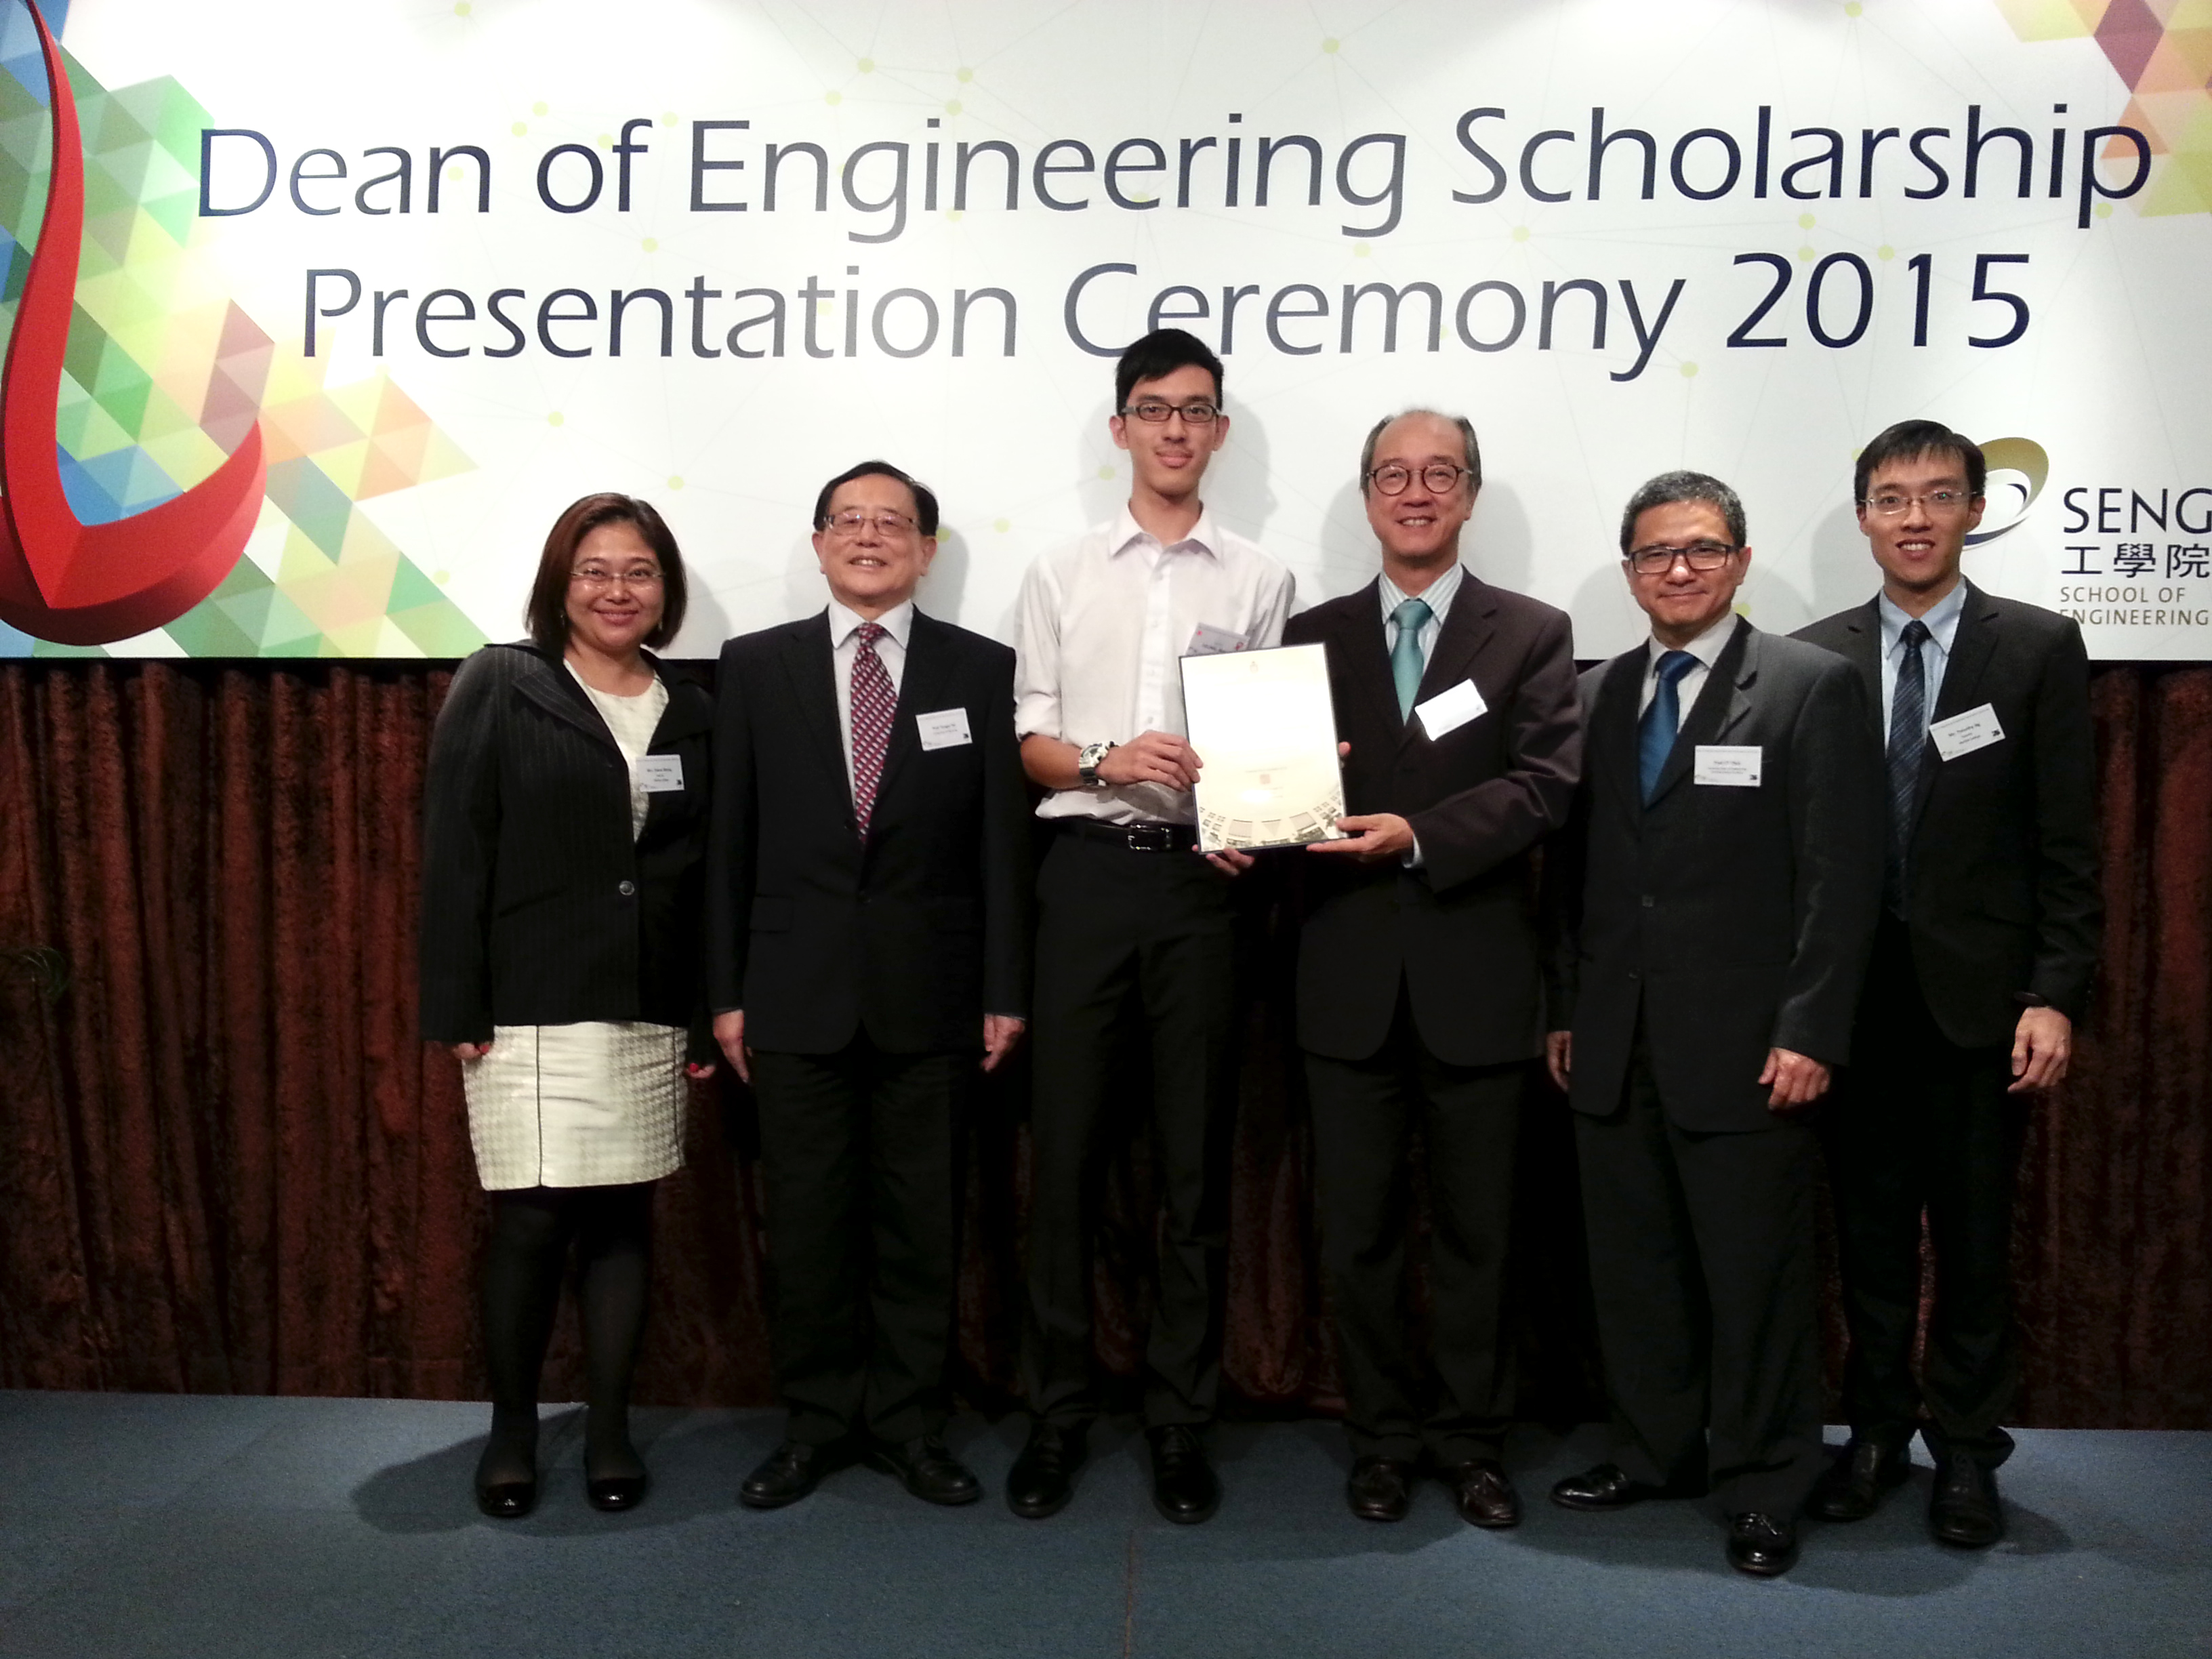 Dean of Engineering Scholarship Presentation Ceremony. From the left: Ms. Diana Wong, Prof. Tongxi Yu, Mr. Rocco Leung, Prof. Siu-Wing Cheng, Prof. Chi-Ying Tsui and Mr. Timothy Ng.